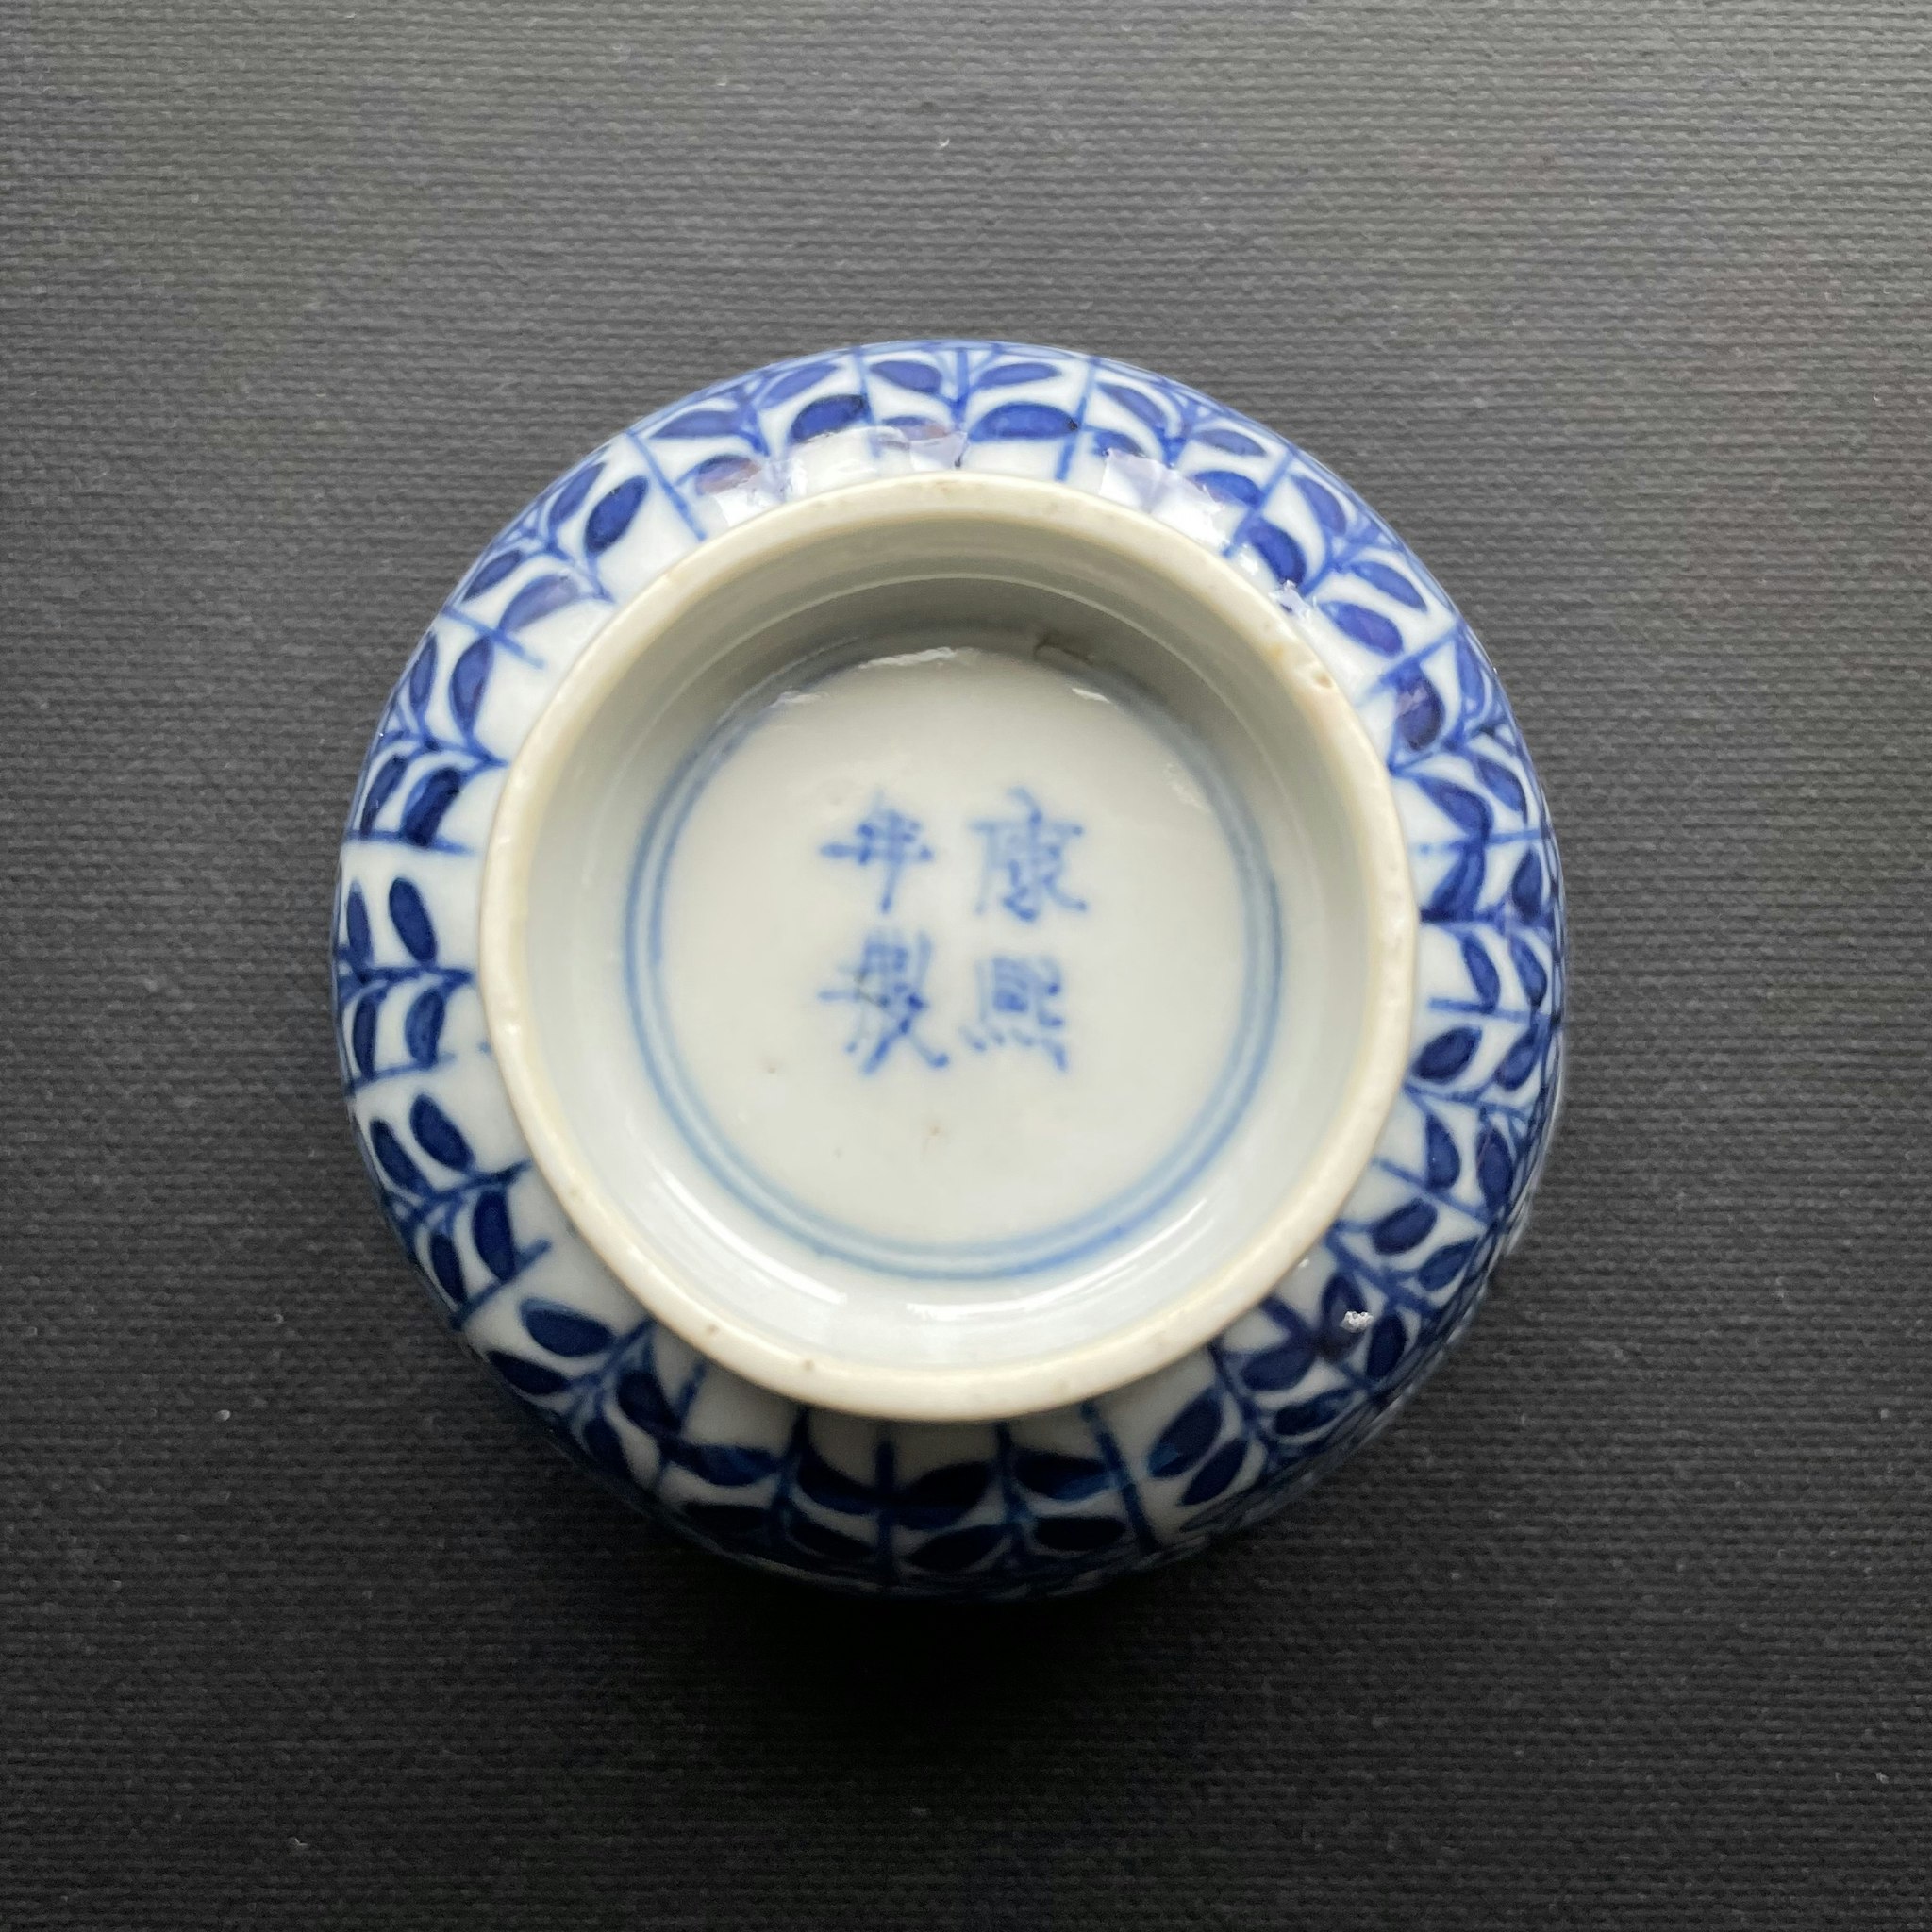 Antique Chinese Teacup & Saucer in underglazed blue & white, Late Qing #888, 889